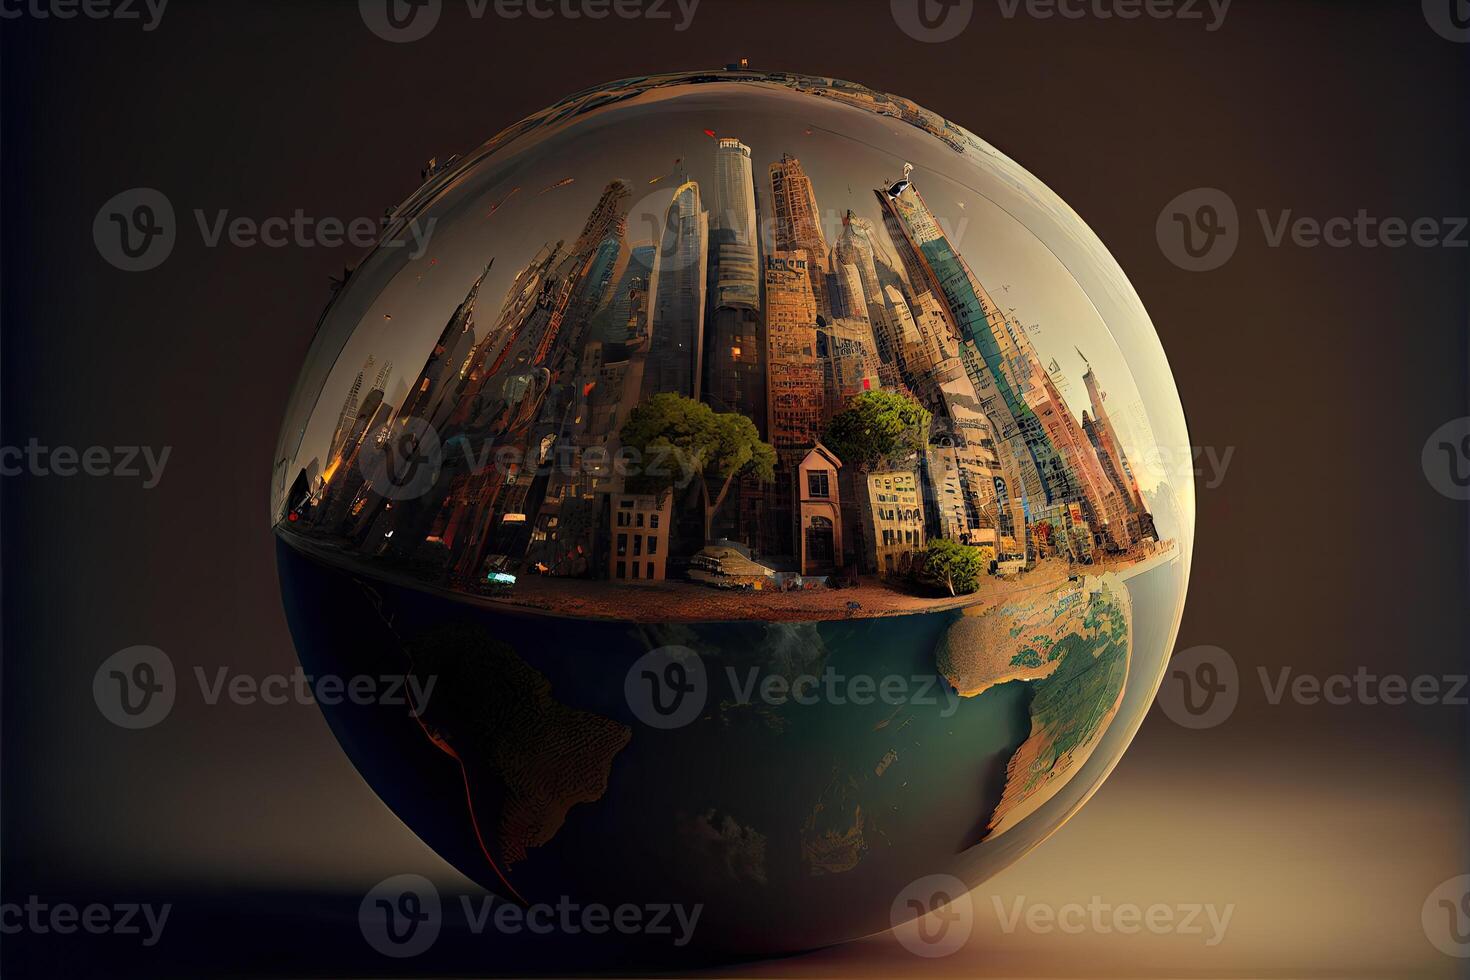 The city grows on the globe photo